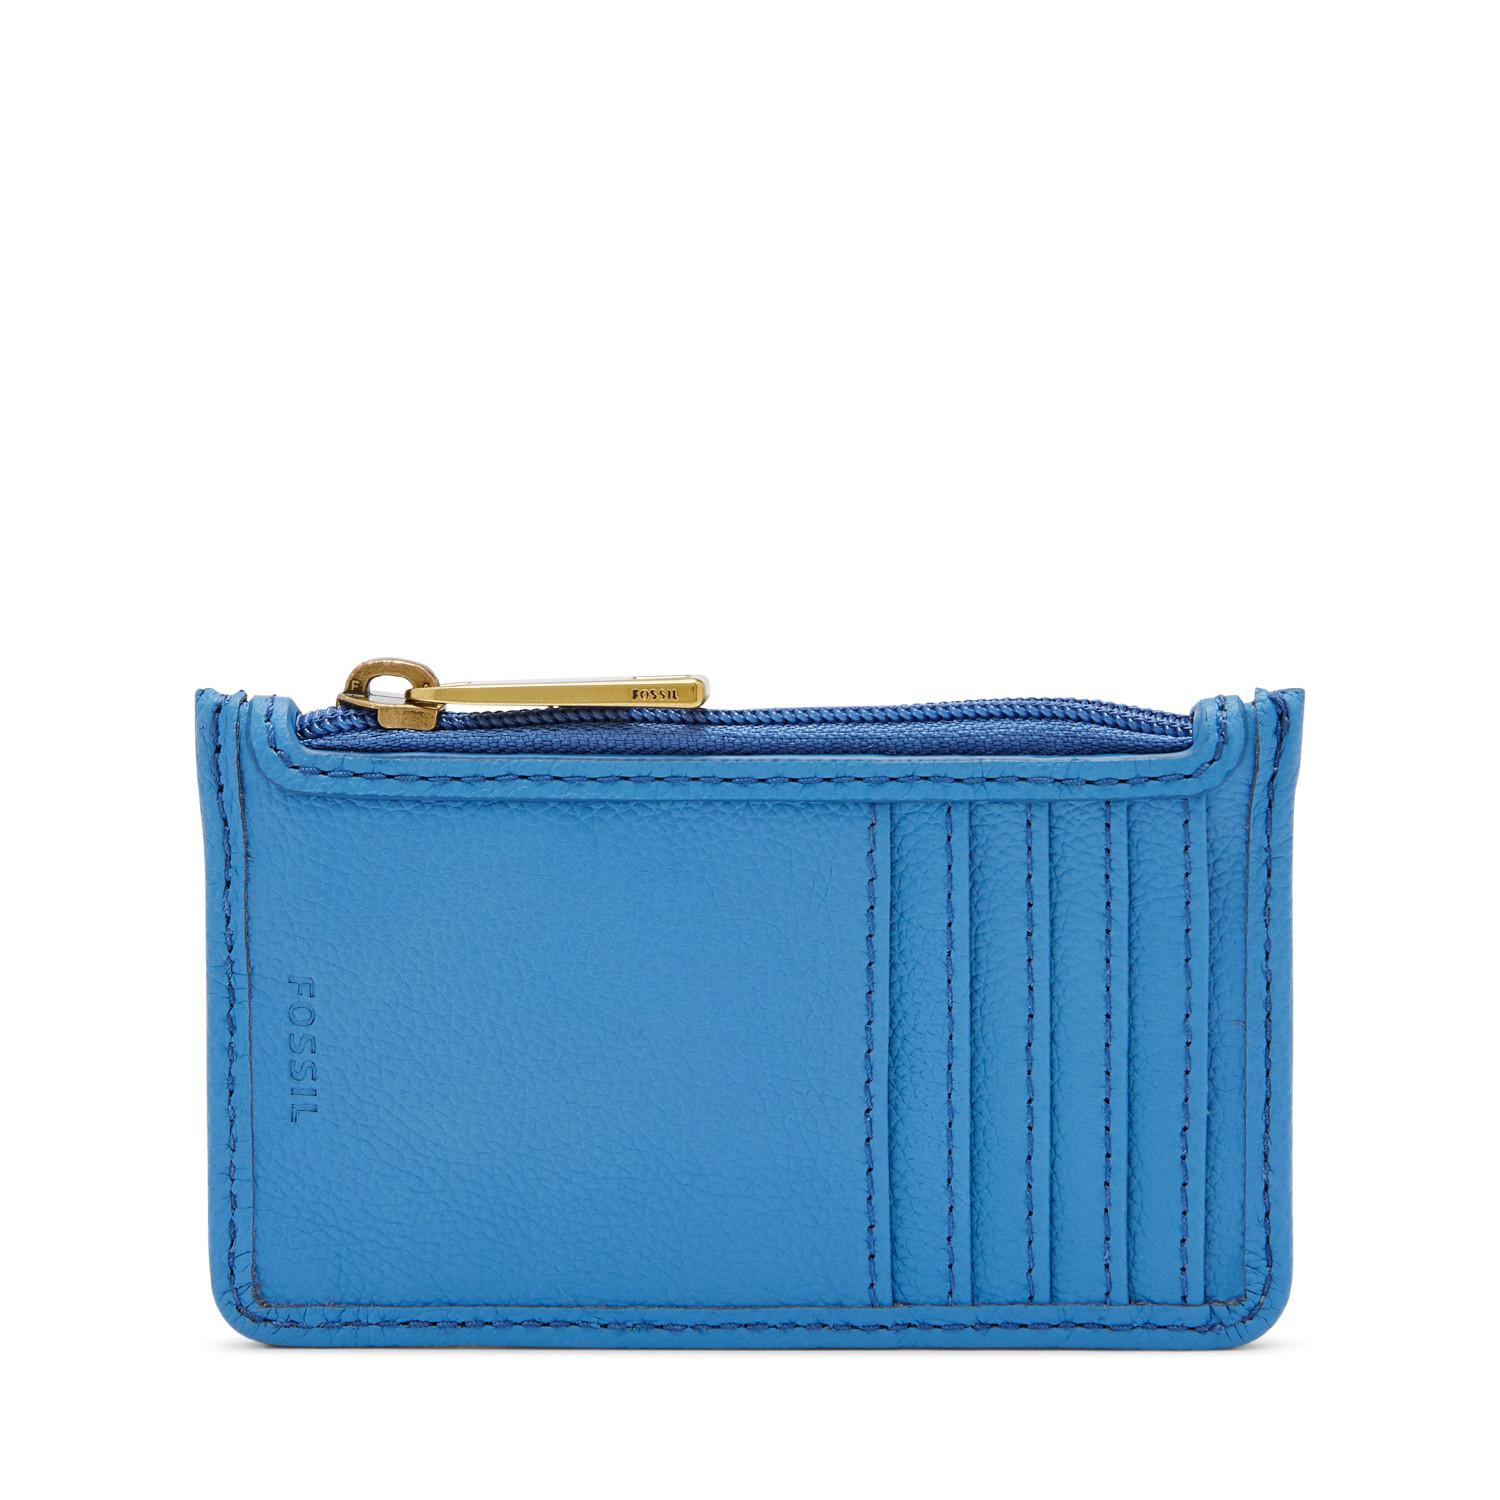 Fossil Sofia Card Case Accessories Blue Dot in Blue - Lyst